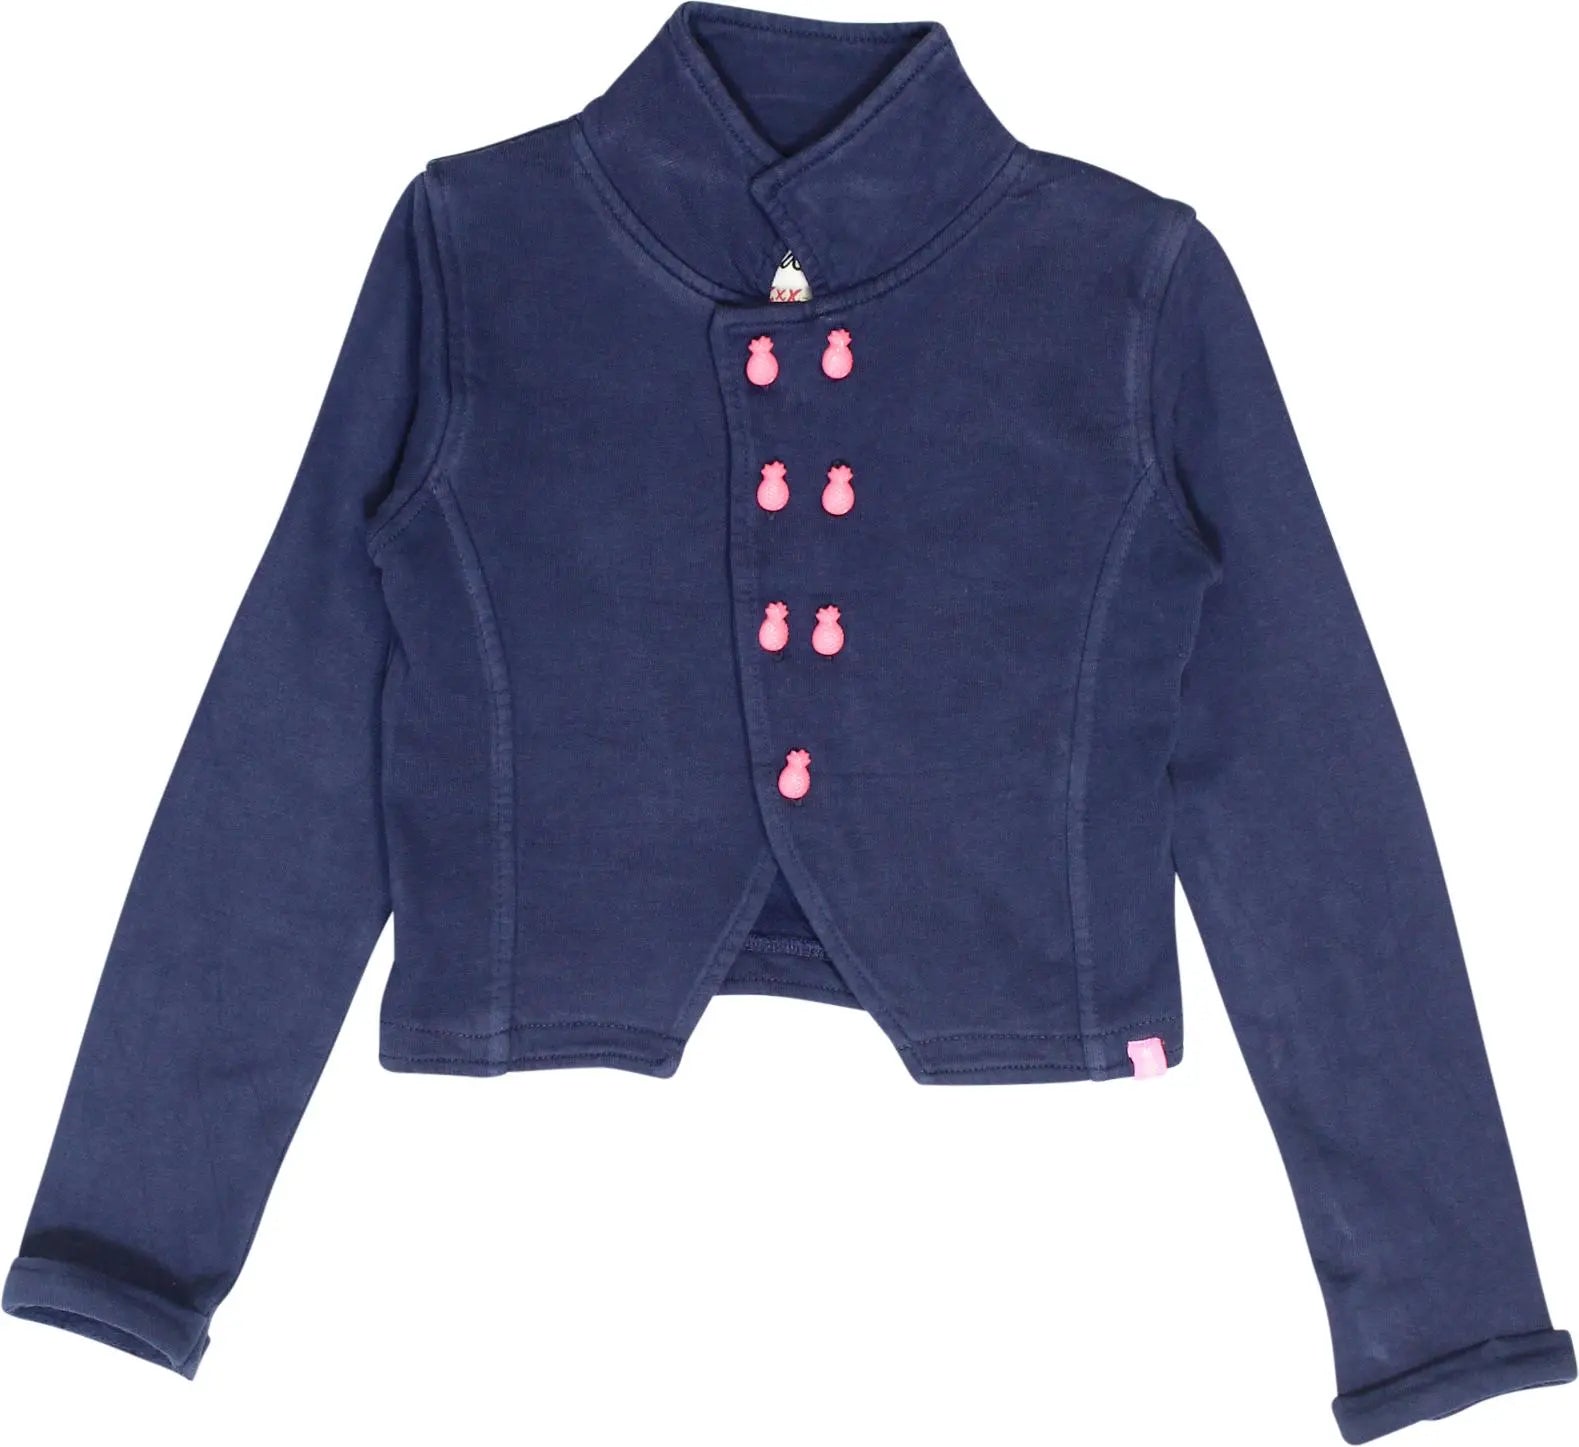 Europe Kids - Blue Cardigan- ThriftTale.com - Vintage and second handclothing